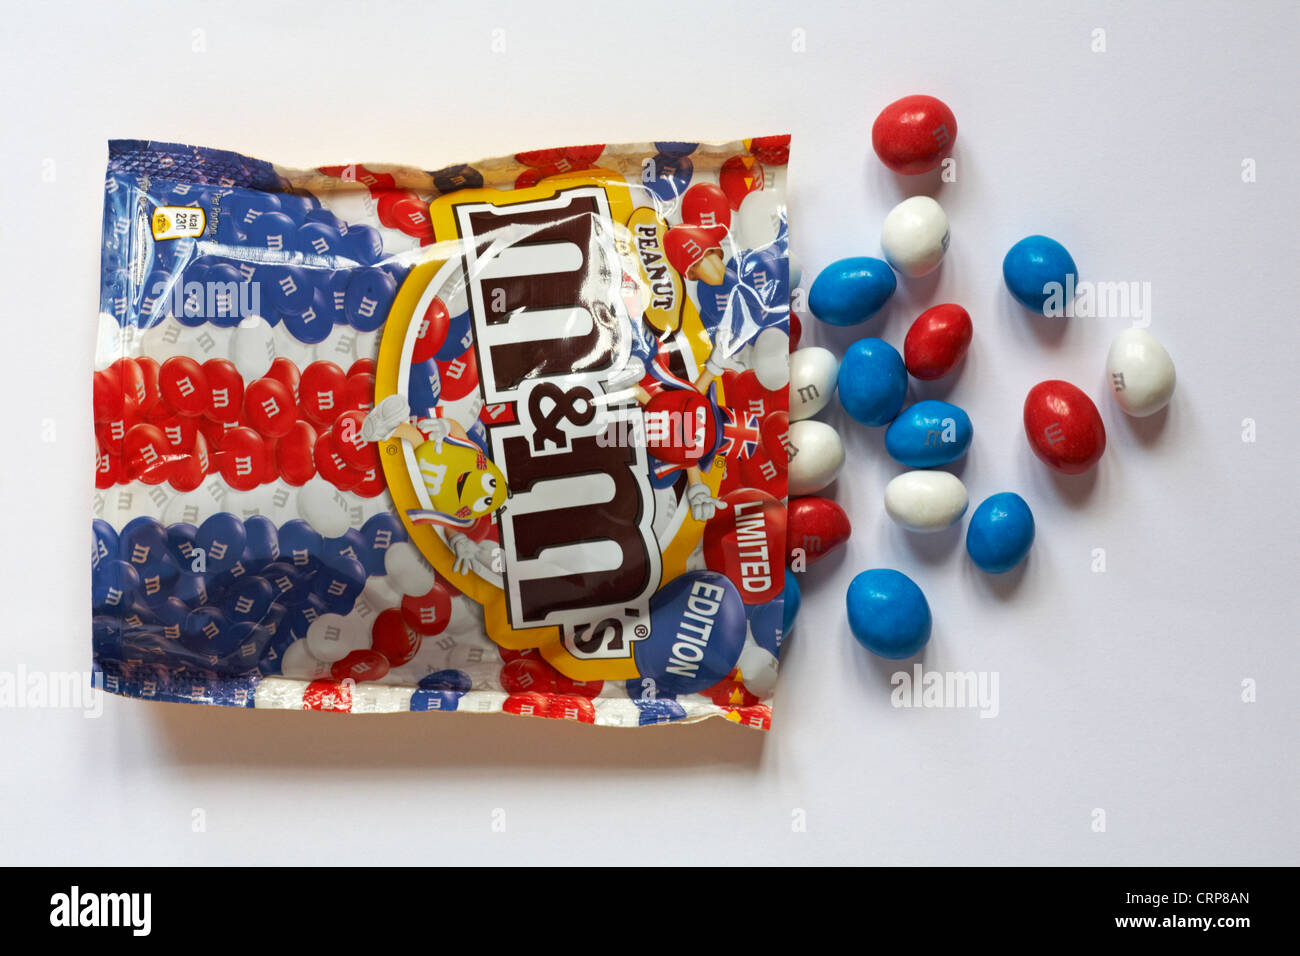 A packet of chocolate peanut m & m's on a white background Stock Photo -  Alamy